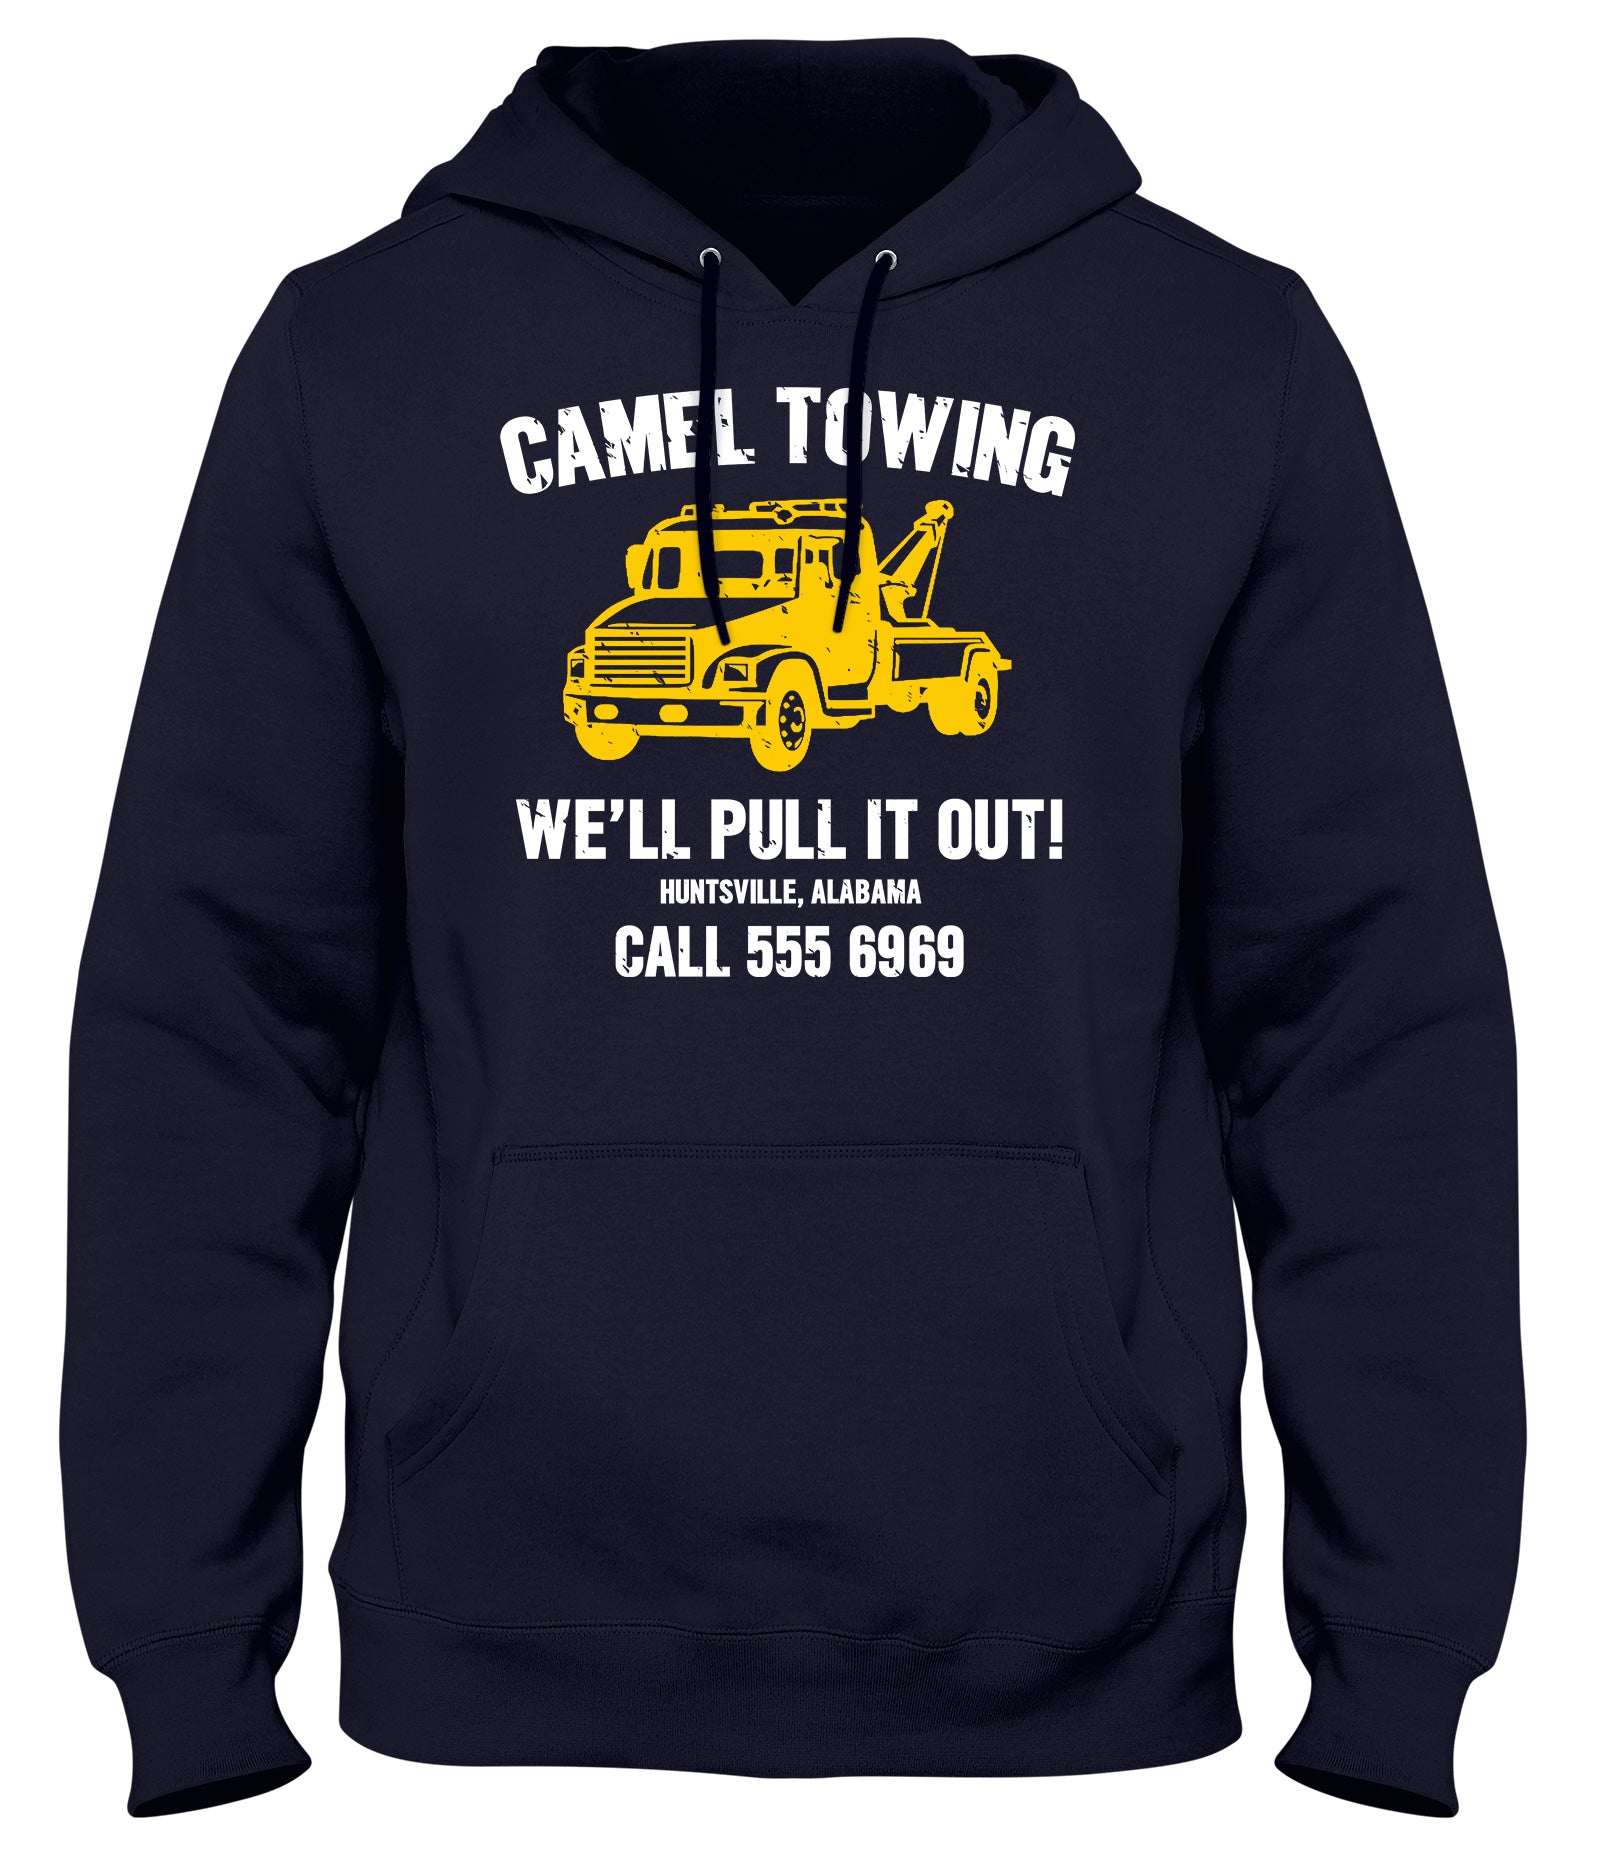 CAMEL TOWING WE'LL PULL IT OUT MENS WOMENS LADIES UNISEX FUNNY SLOGAN HOODIE